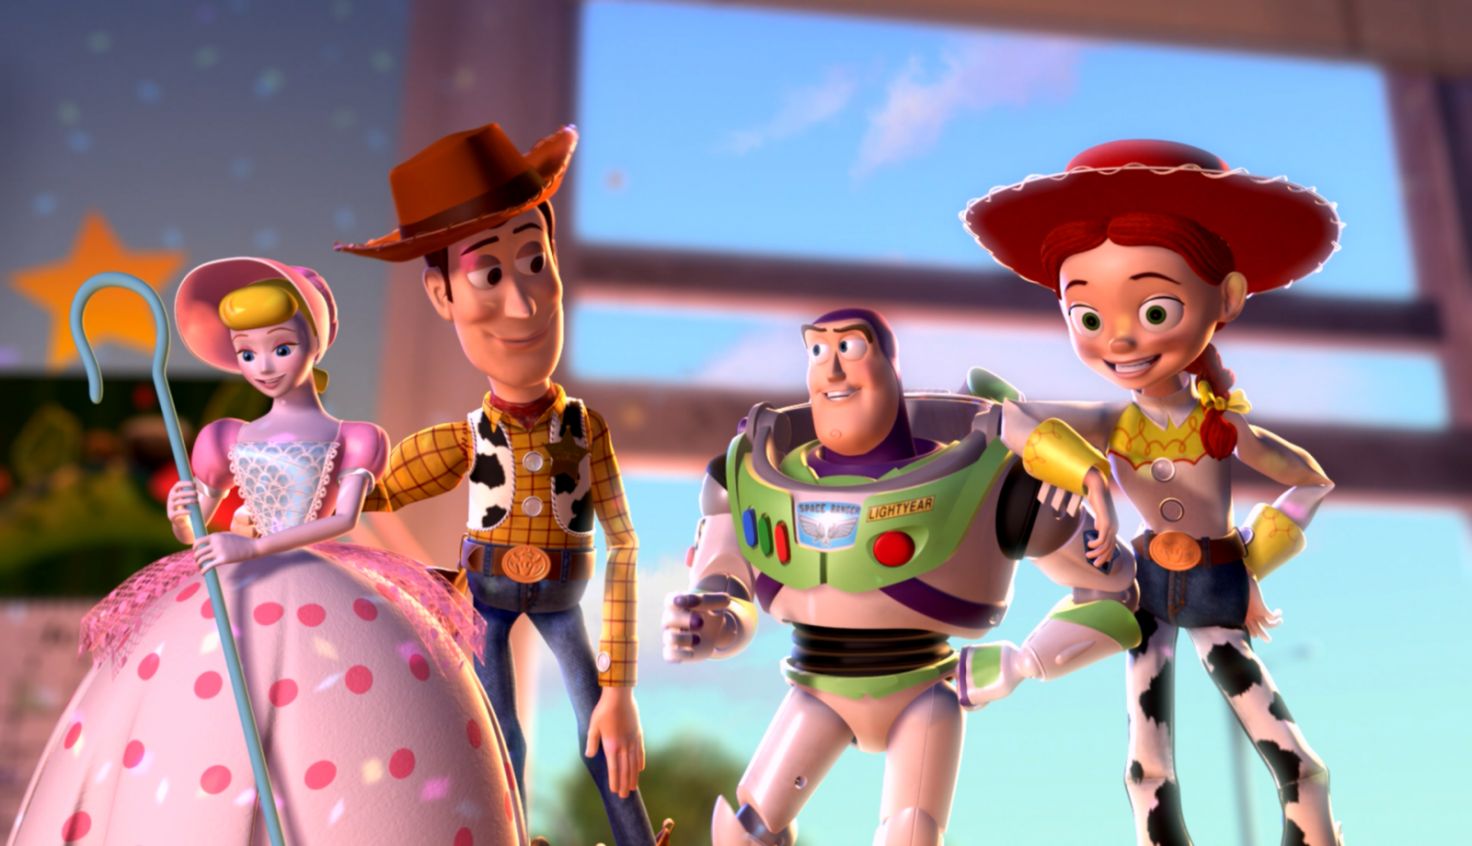 Woody Toy Story HD Wallpaper Background Image Story Jessie And Bo Peep